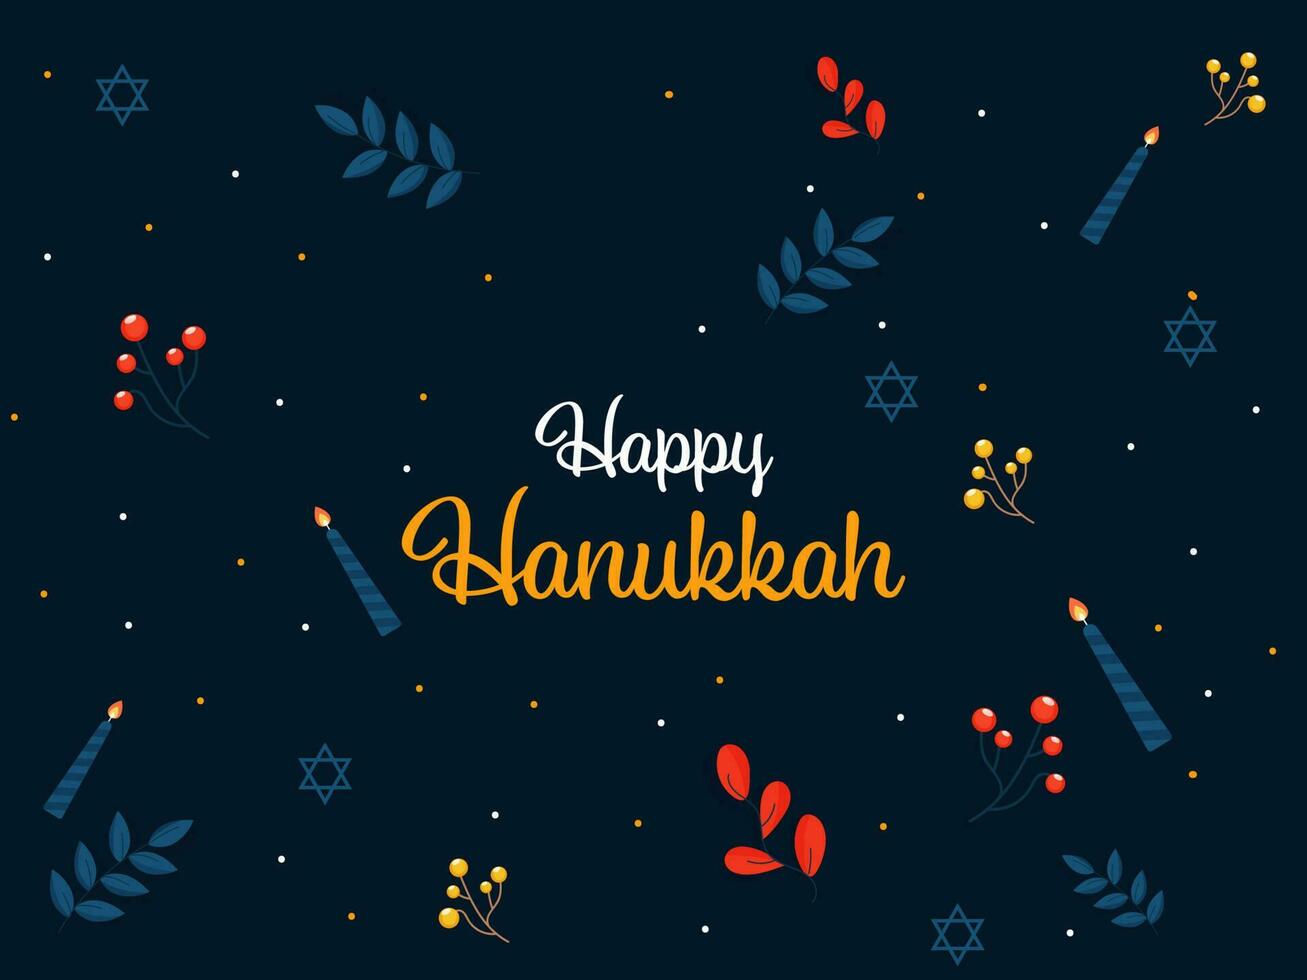 Happy Hanukkah Lettering With Lit Candles, Berries, Leaves, Stars Of David Decorated On Blue Background. vector